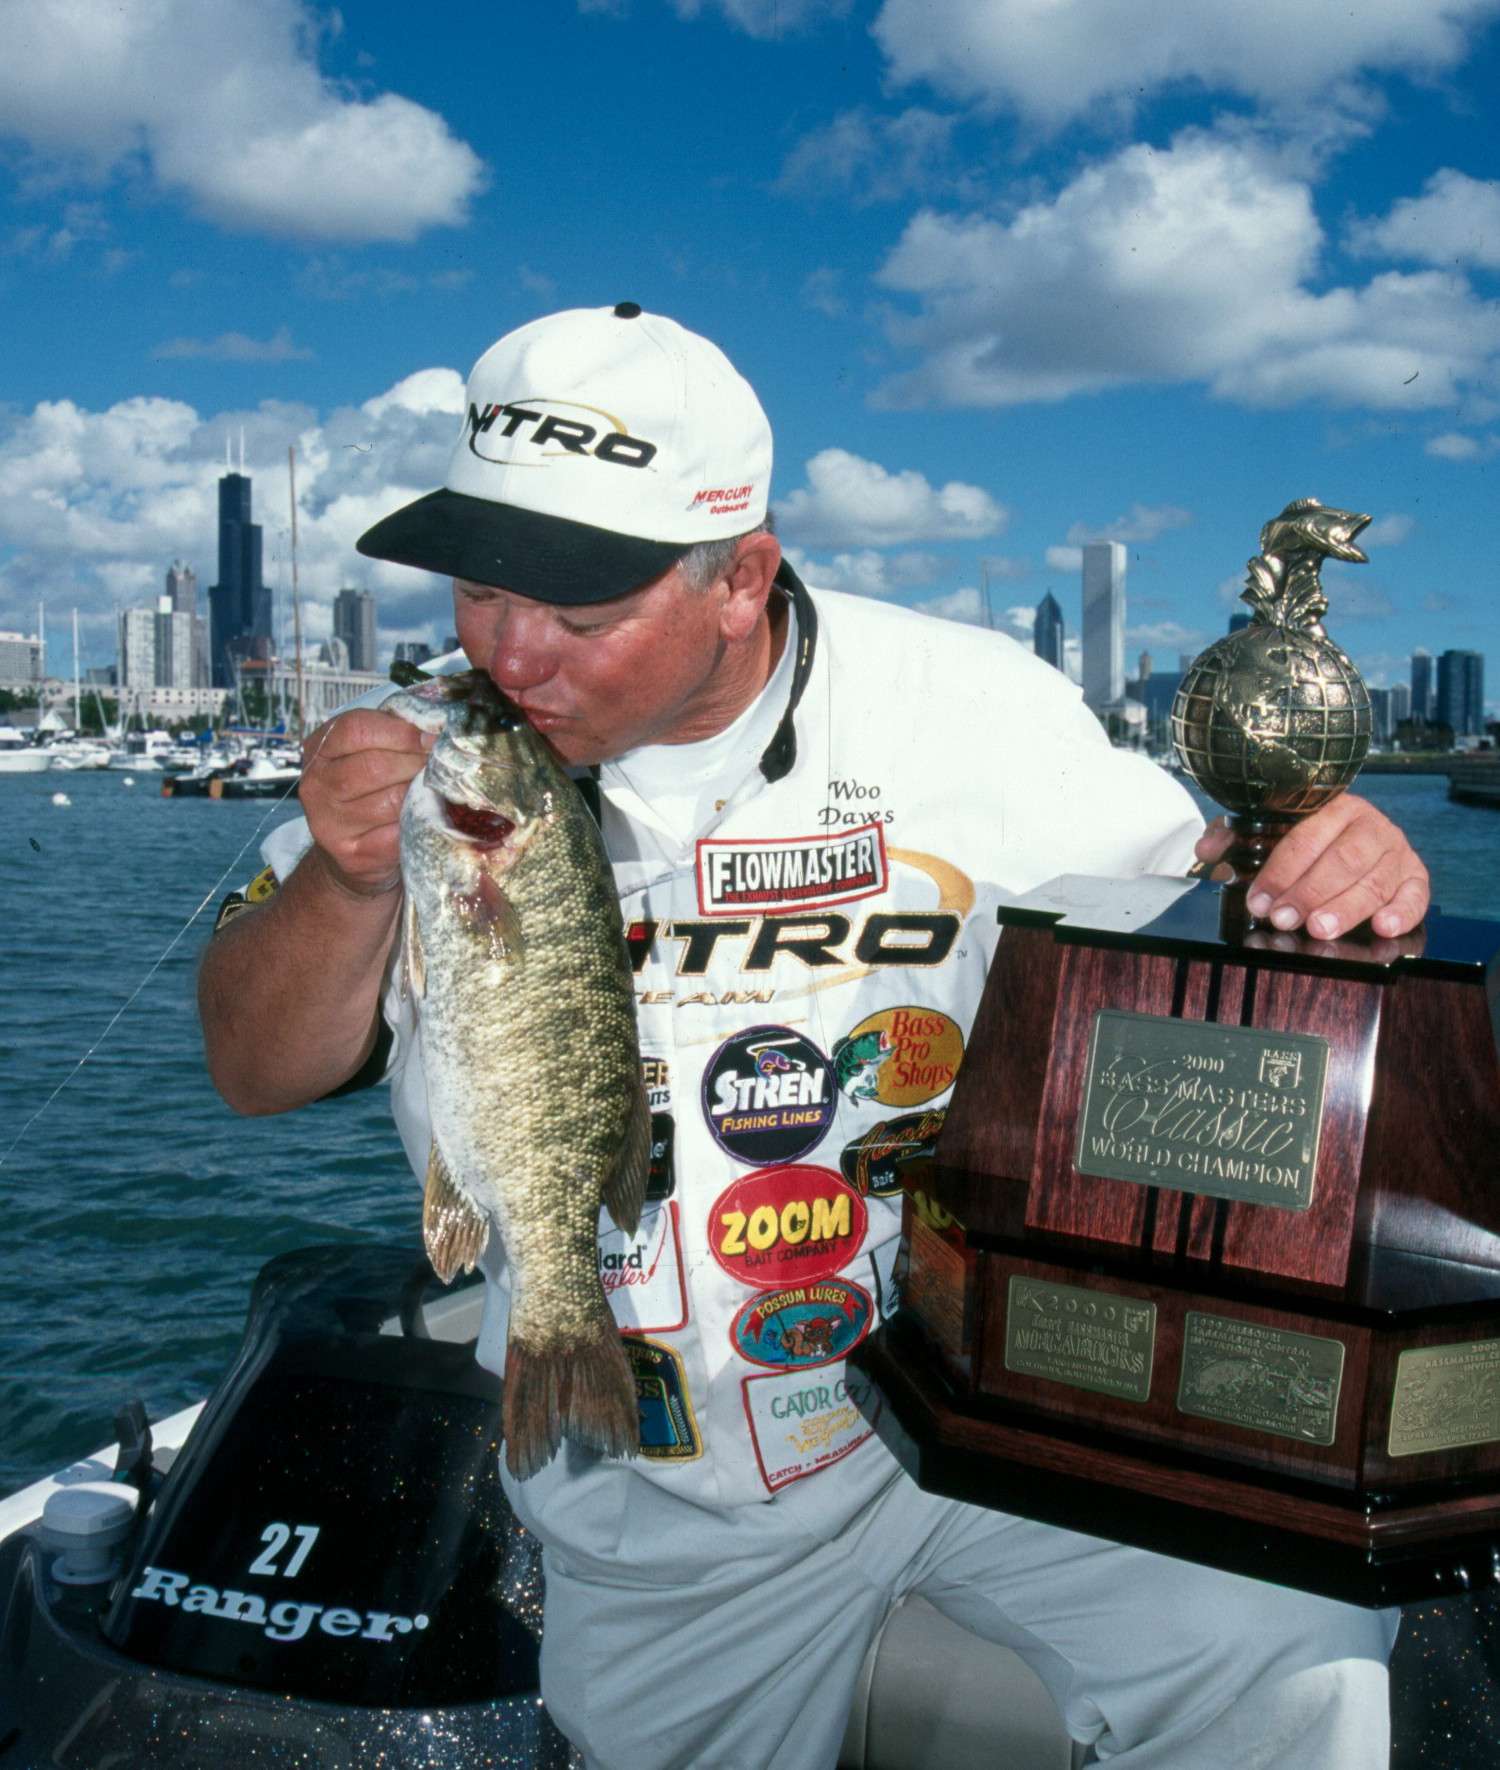 Oldest Classic Winner: Woo Daves, 54
At the ripe age of 54 years old, Woo Daves is the oldest Classic winner so far. He took the trophy on Chicago's Soldier Field after catching 27 pounds, 13 ounces out of Lake Michigan during the 2000 Bassmaster Classic. For reference, the average age of competitors in the Bassmaster Classic is usually in the mid- to late 30s.